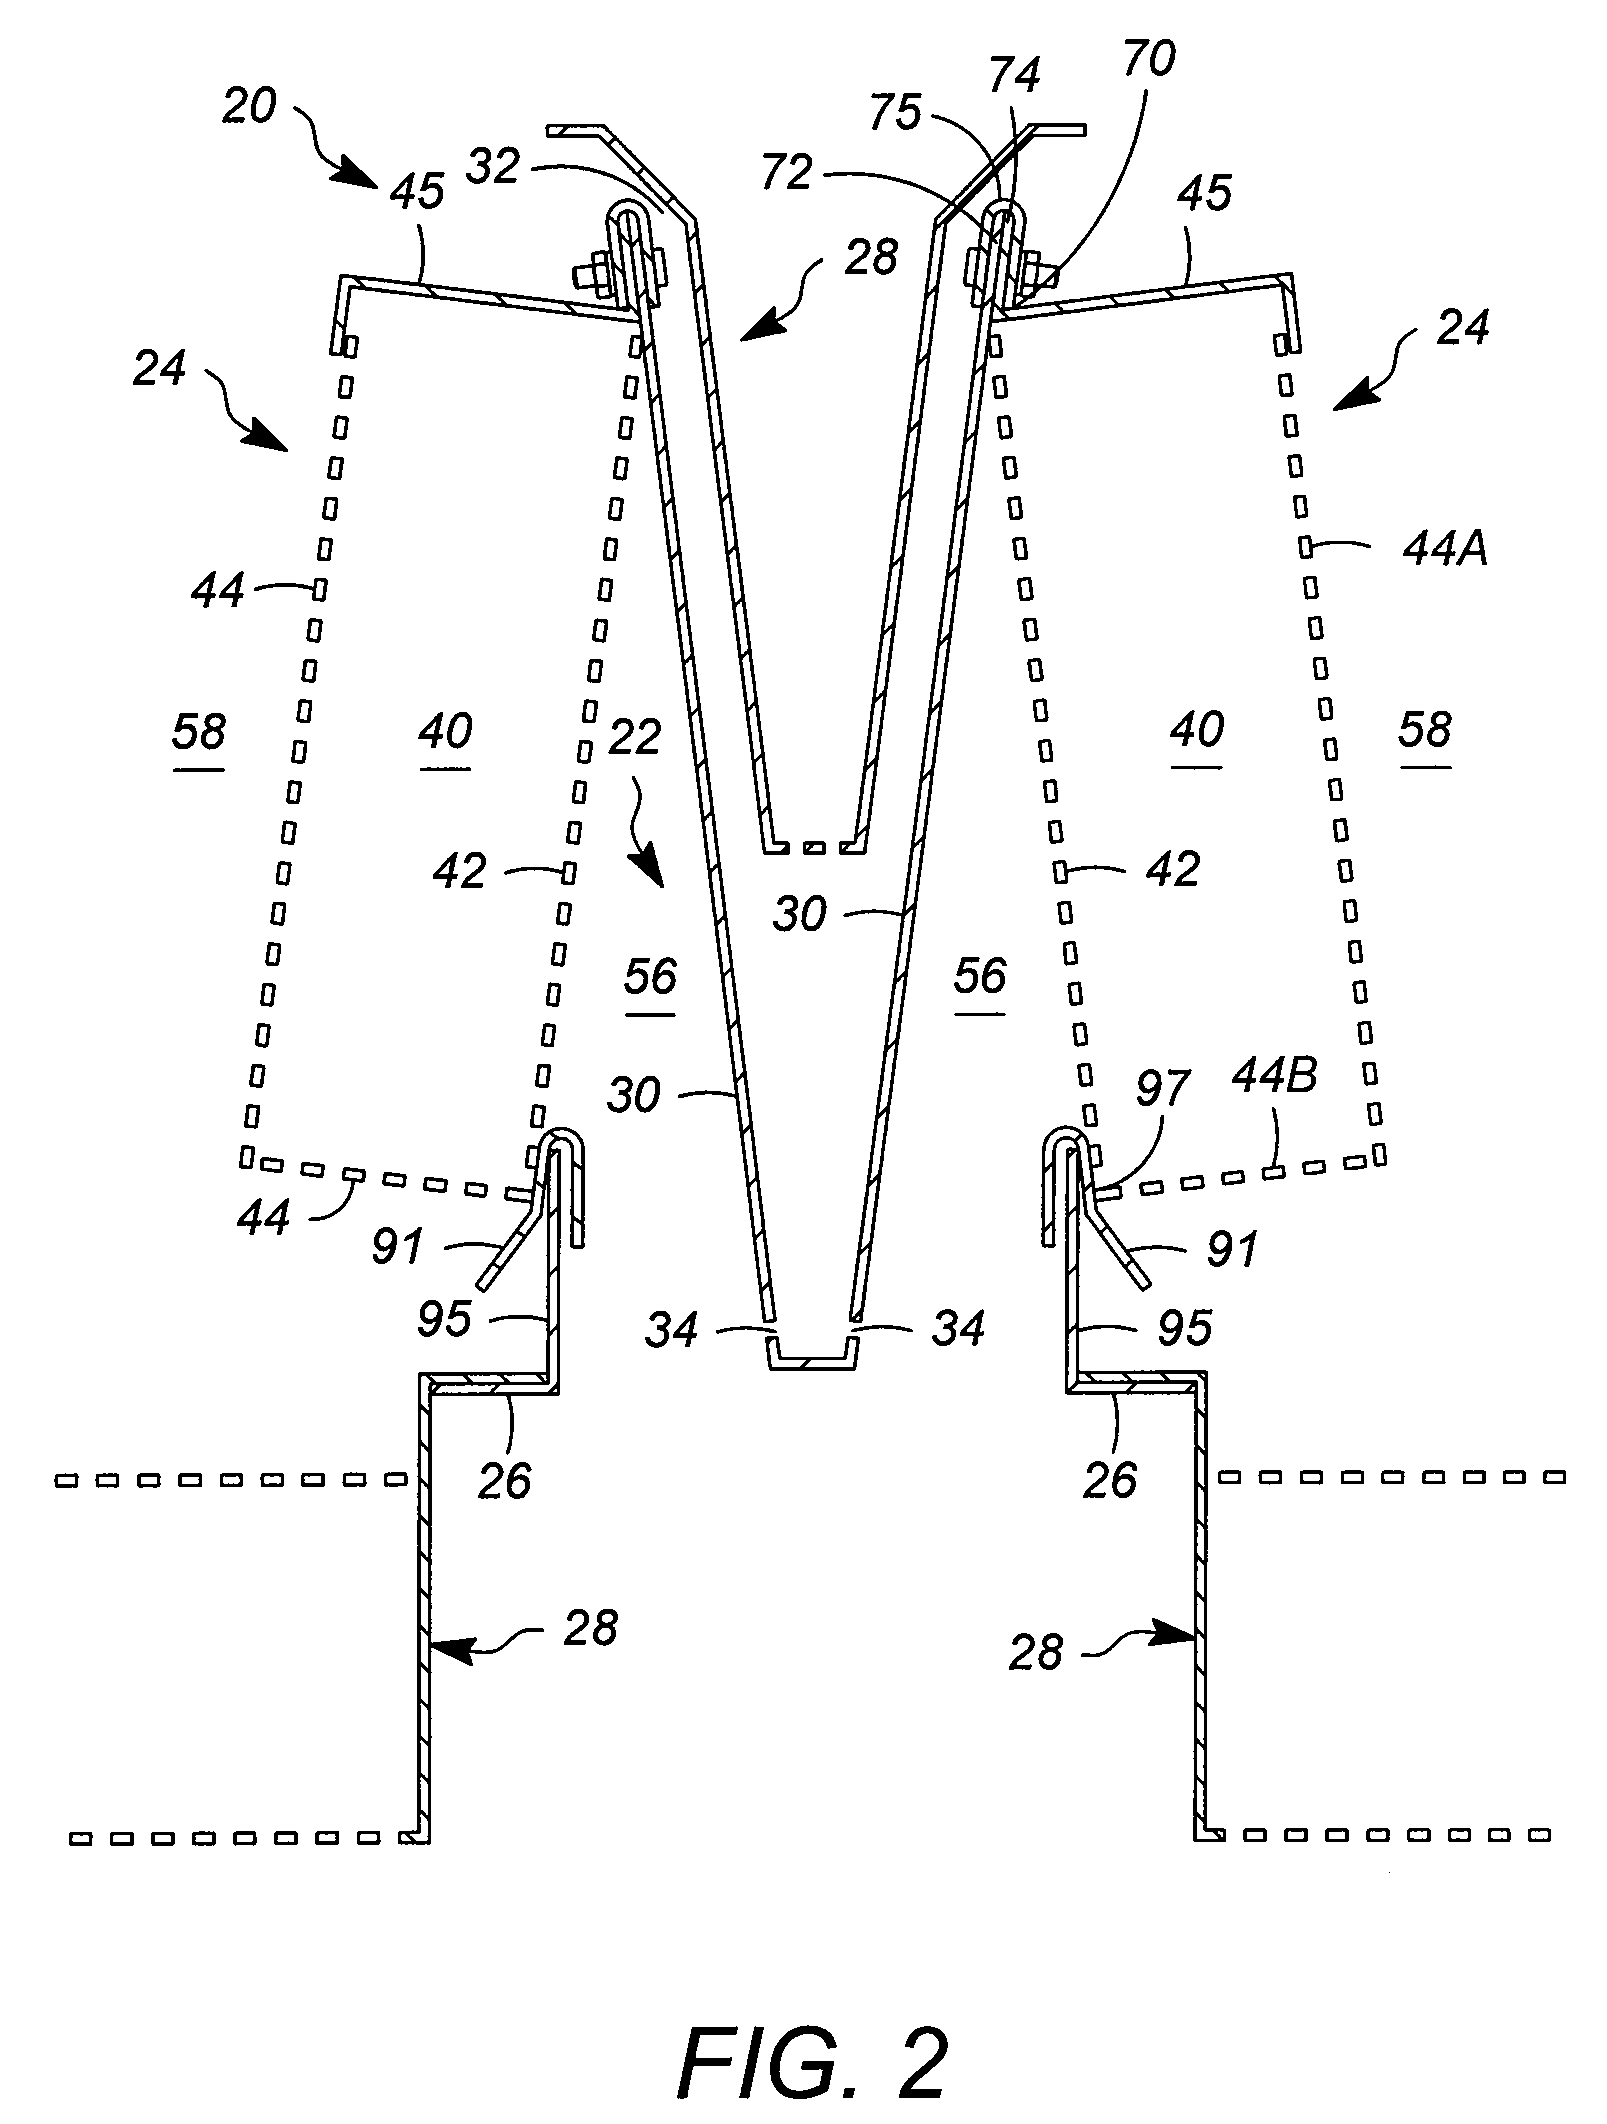 Contacting stages for co-current contacting apparatuses